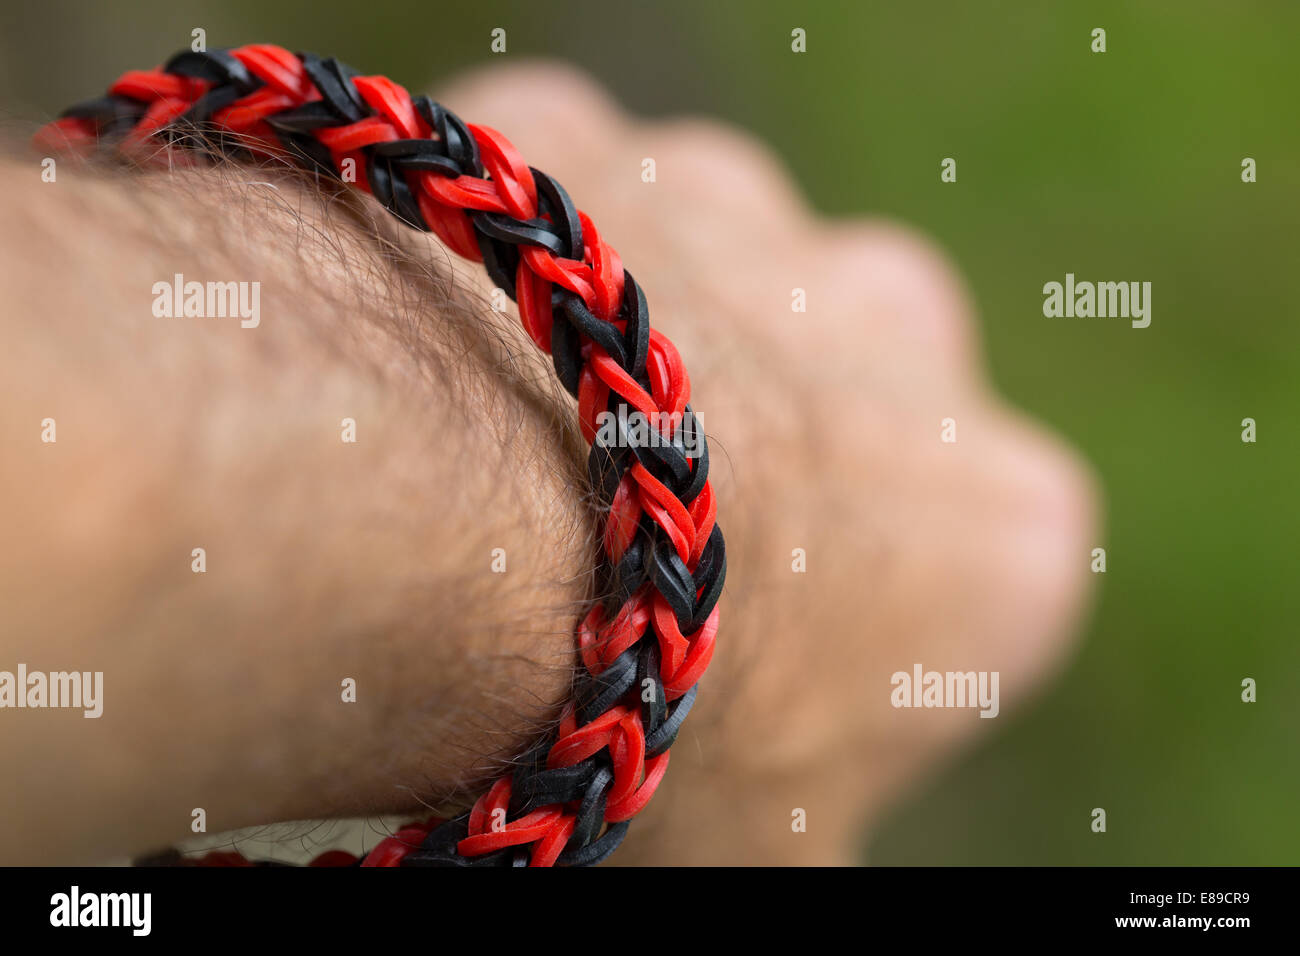 A red and black bracelet made from loom bands on a man's wrist. Model Released. Stock Photo